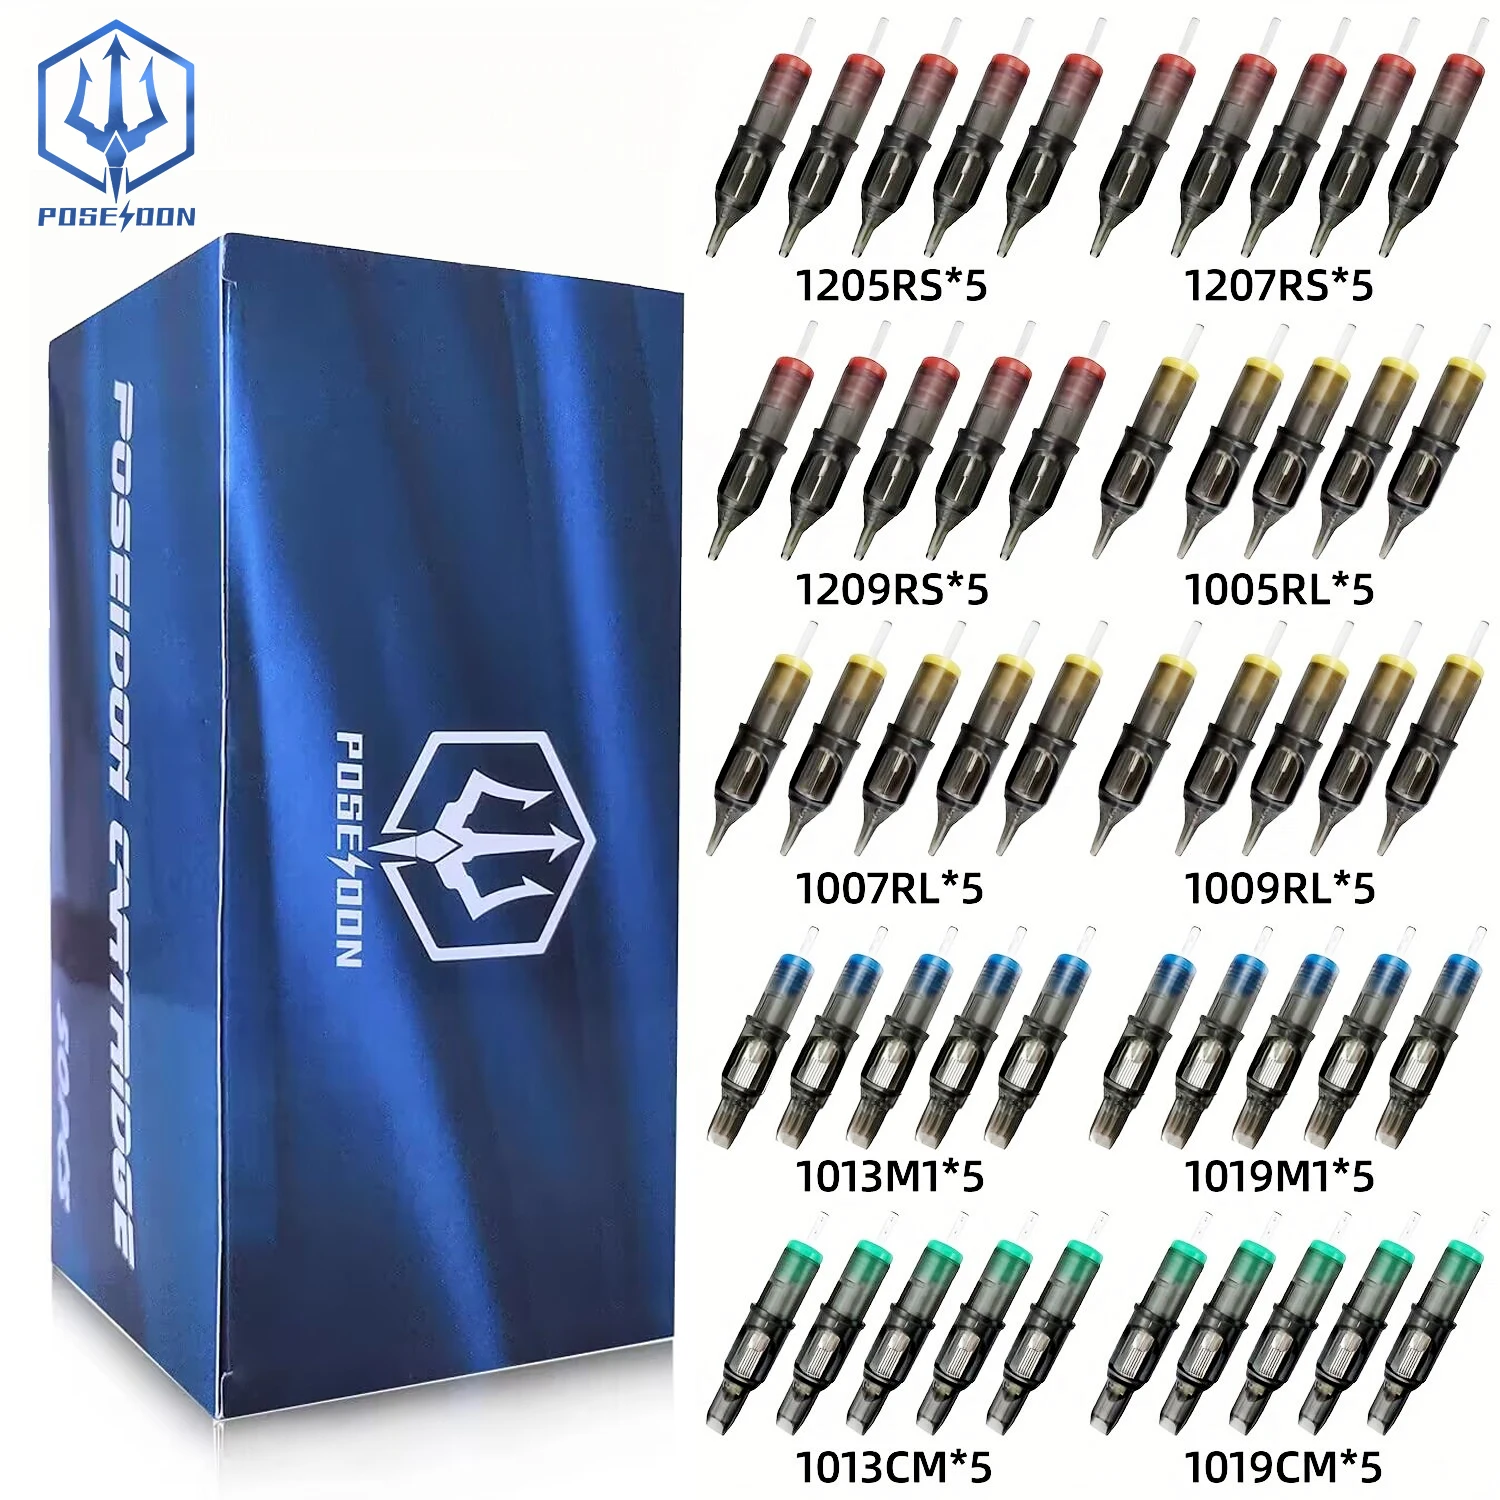 

POSEIDON 50PCS Mixed Professional RL RS RM M1 Tattoo Cartridge Needles with Membrane Safety Cartridges Disposable Tattoo Needle